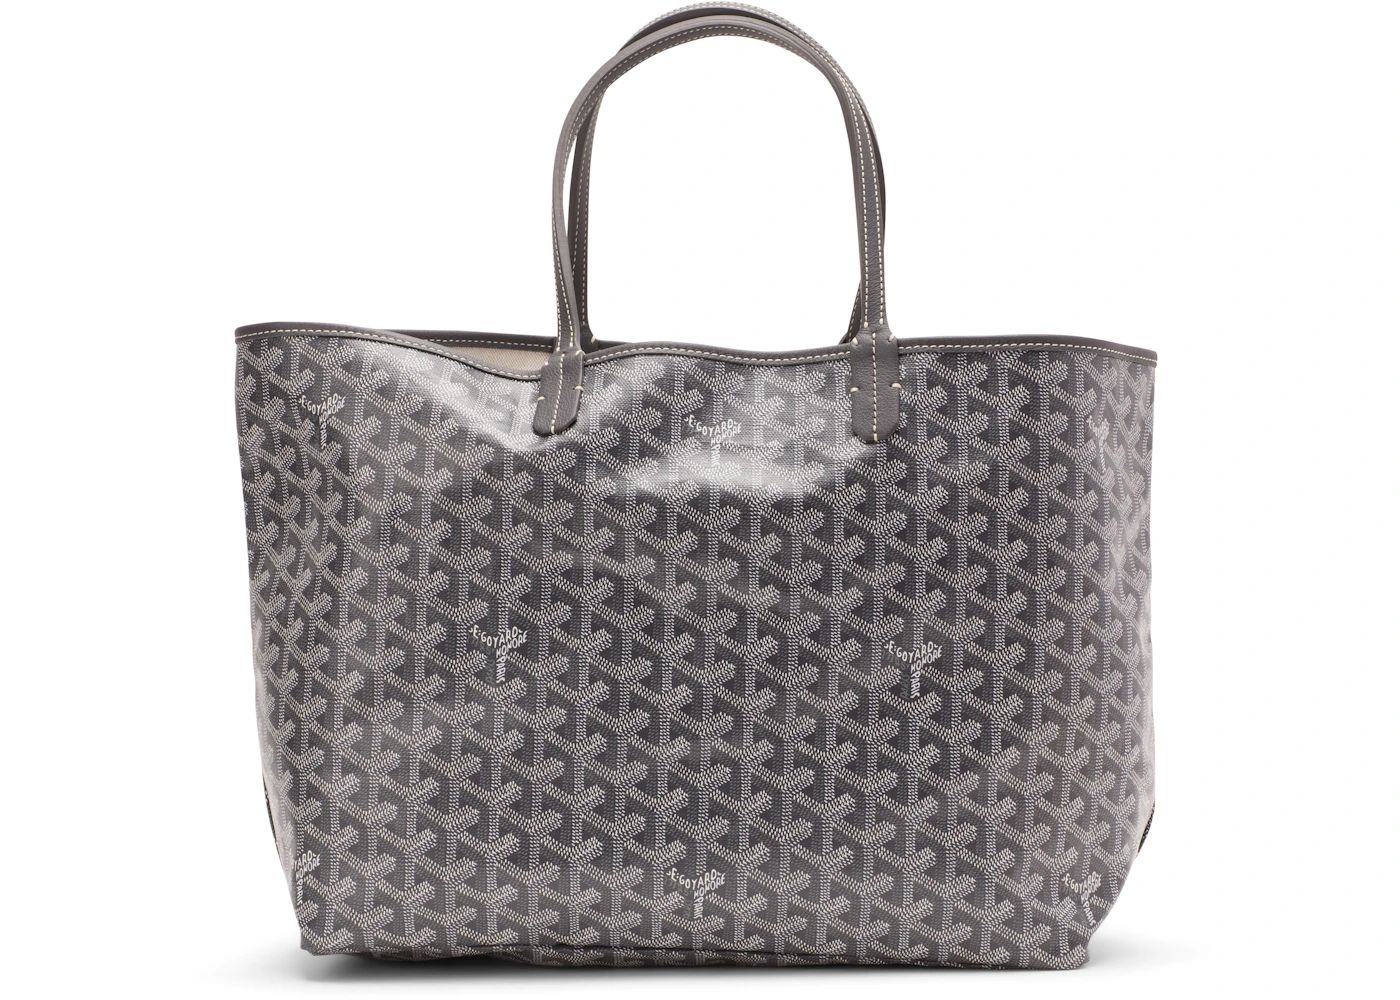 Buy NowStarting at $111/mo with Affirm. Learn moreGoyard Saint Louis Tote Goyardine PM Grey | StockX